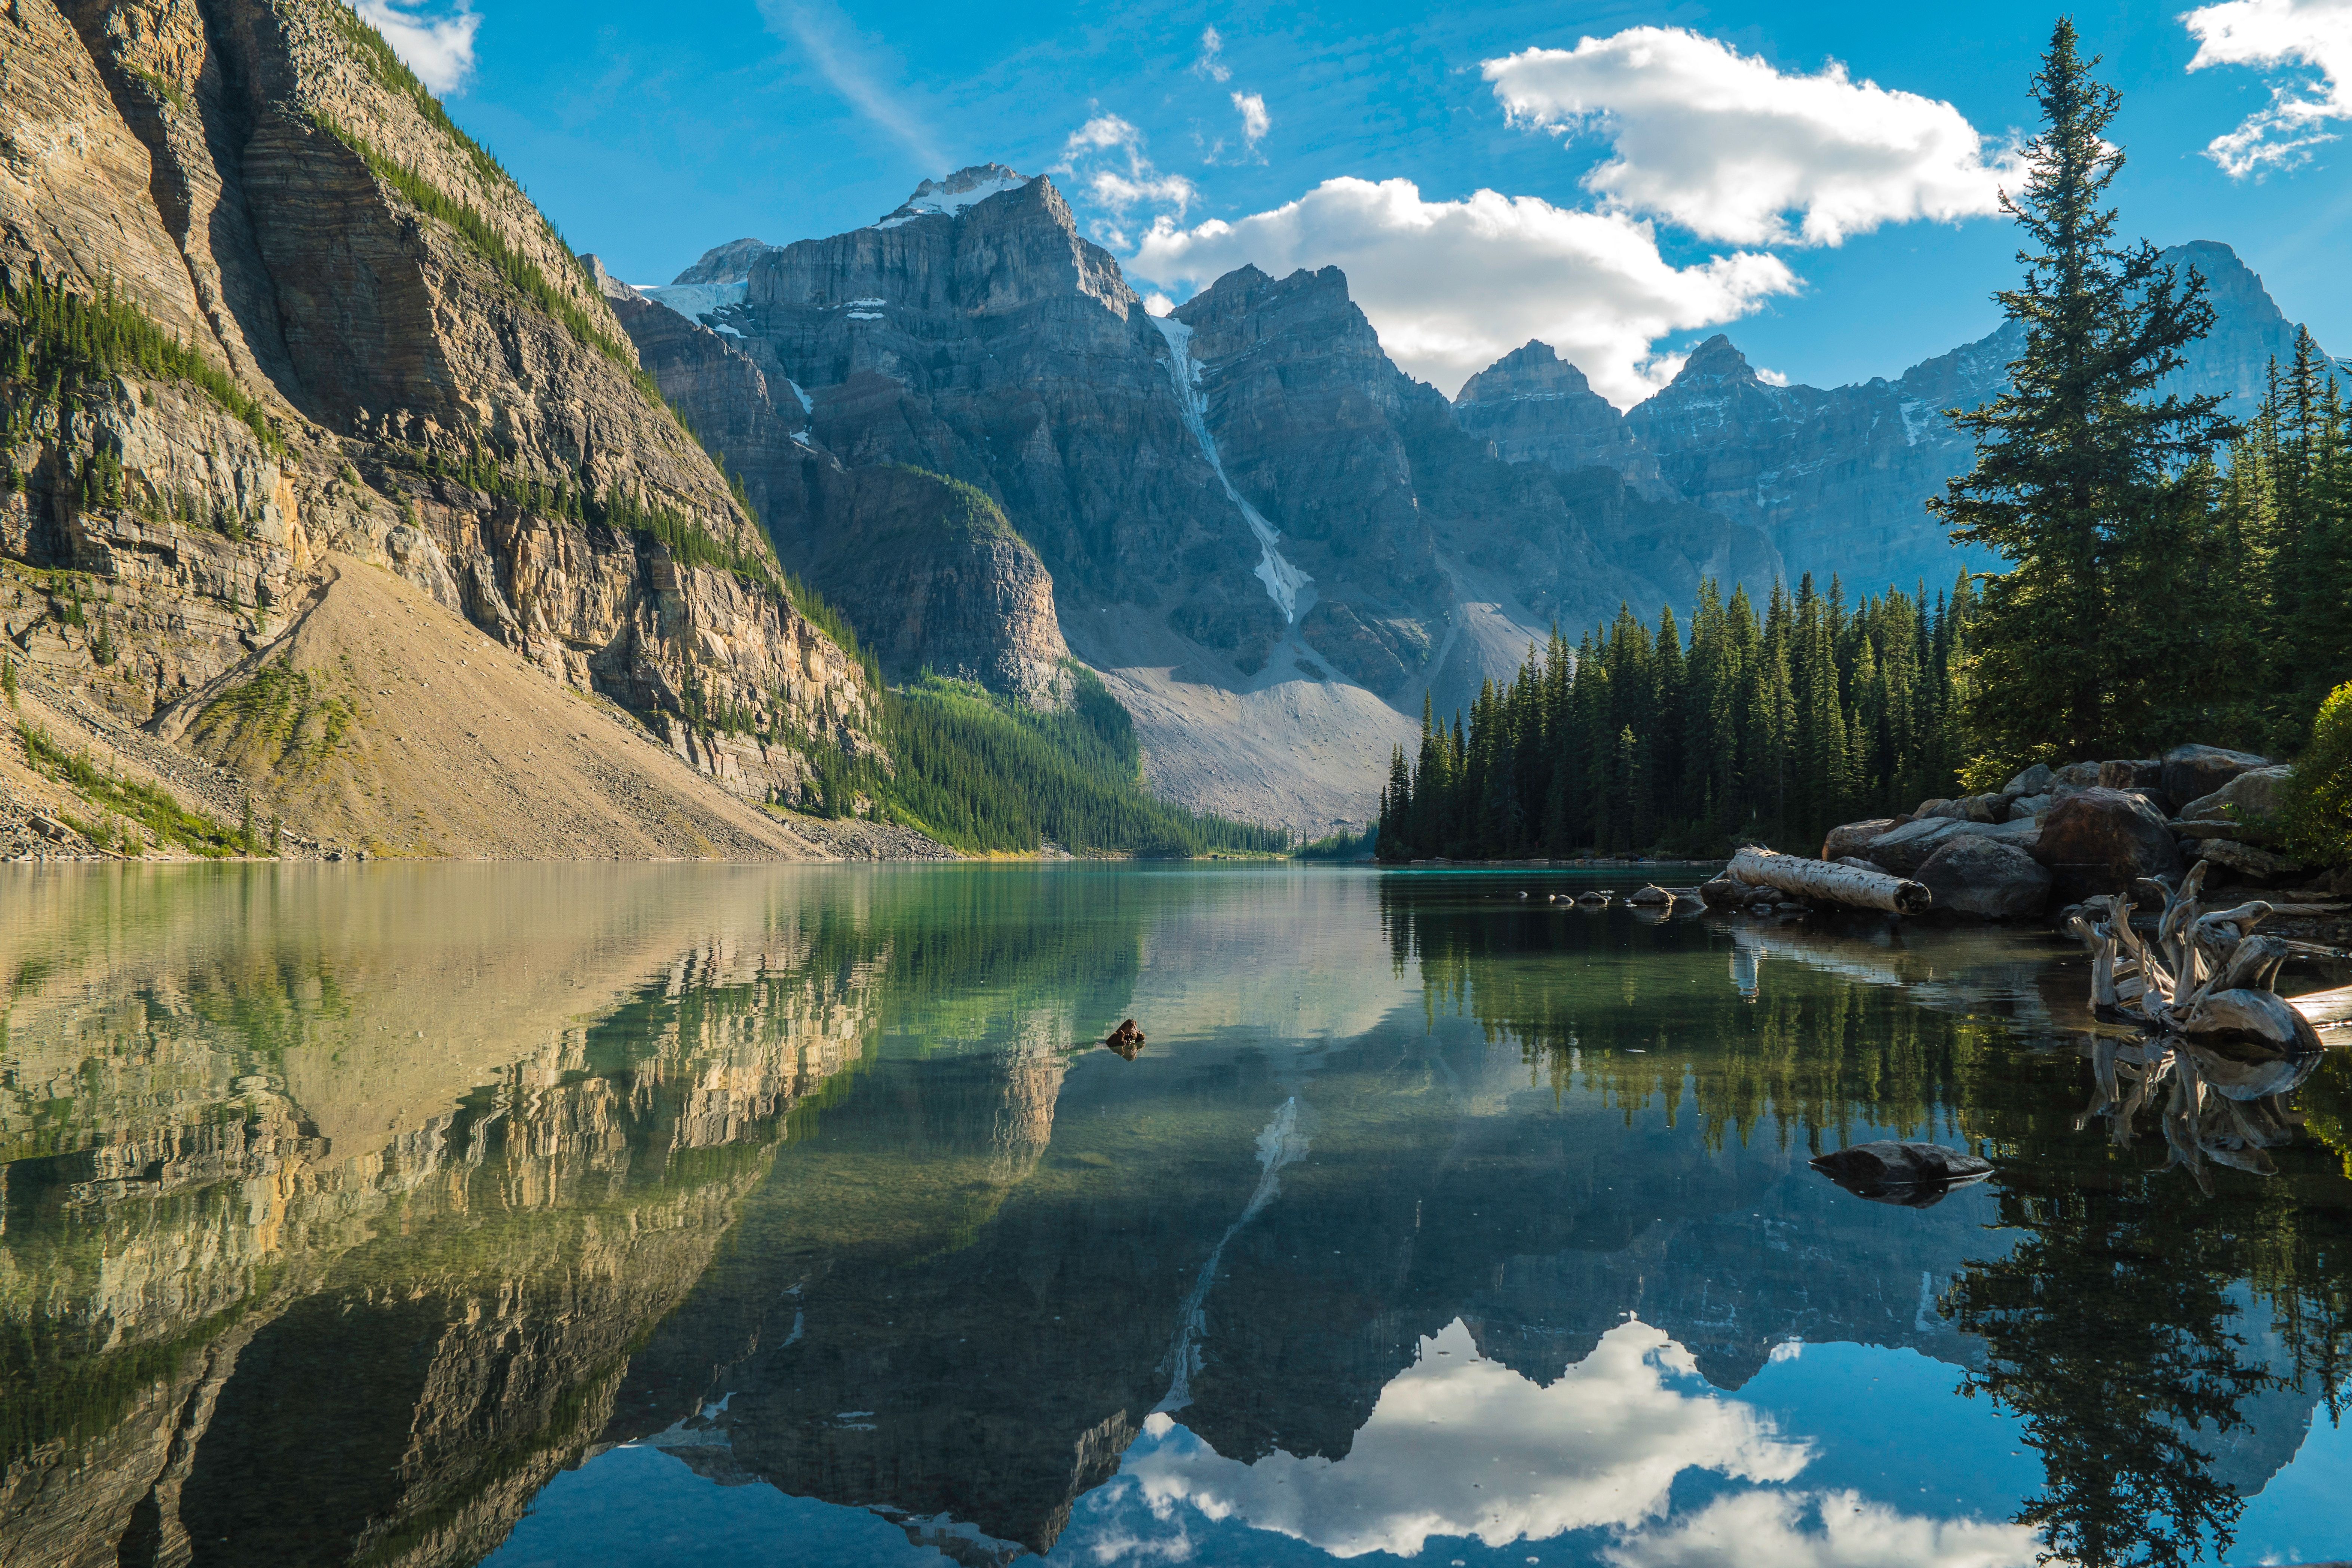 6289x4193 #peaceful, #outdoors, #calm, #cloud, #cloudscape, #trees, #lake, #water, #blue sky, #wallpaper, #summer, #sun, #sunshine, #Public domain image, #nature, #mountain, #canadian, #canada, #forest, #reflection, #mountains. Mocah HD